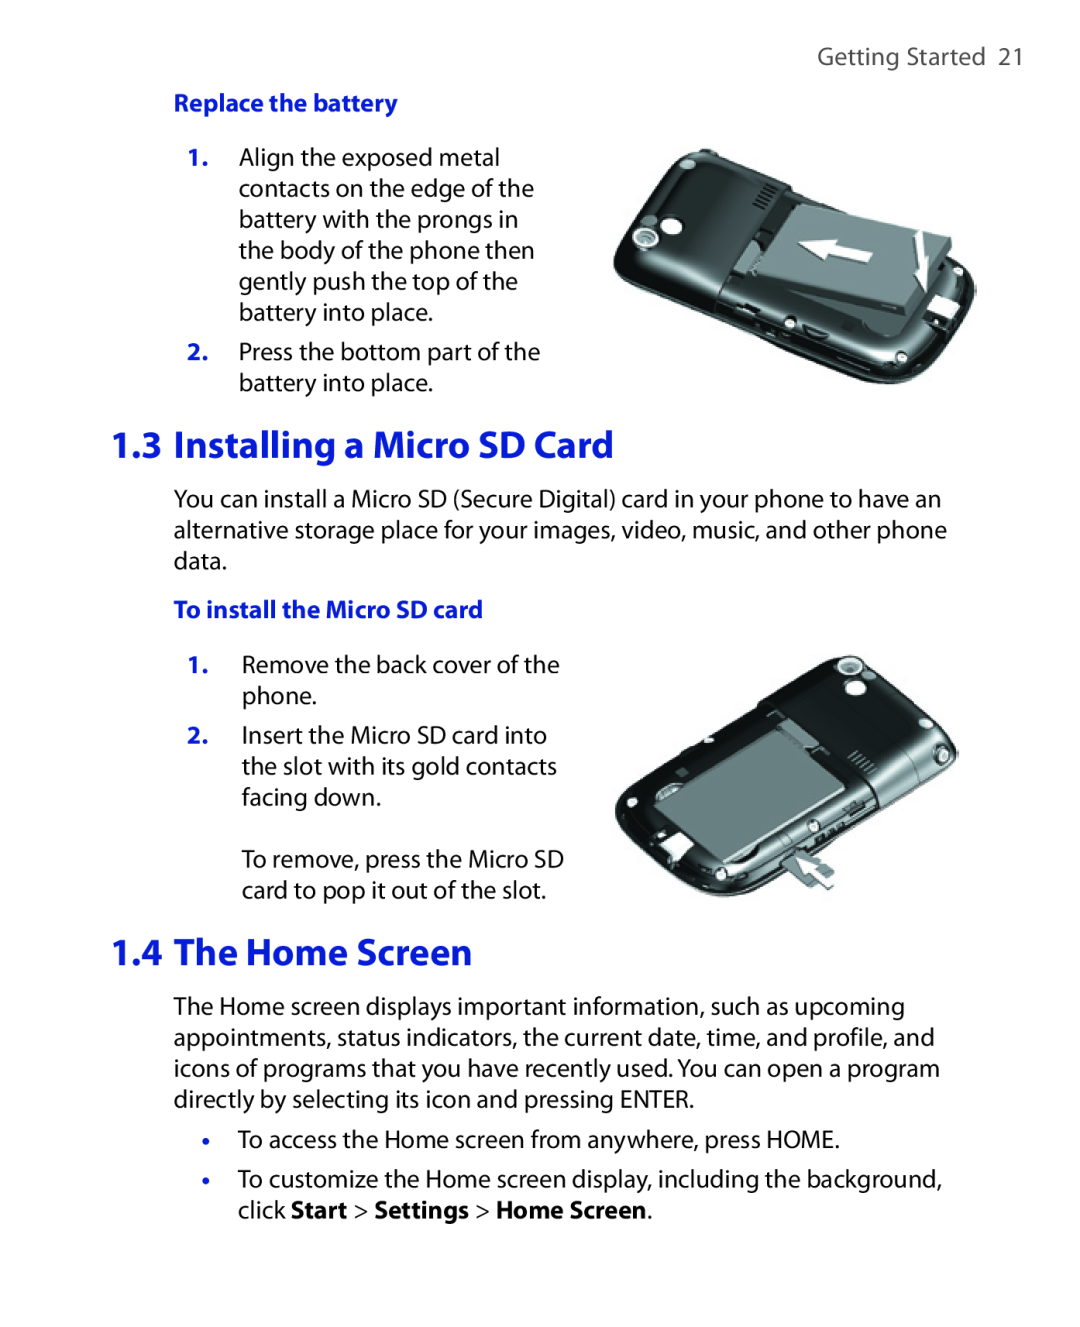 HTC HTC S621 user manual Installing a Micro SD Card, The Home Screen, Getting Started, Replace the battery 